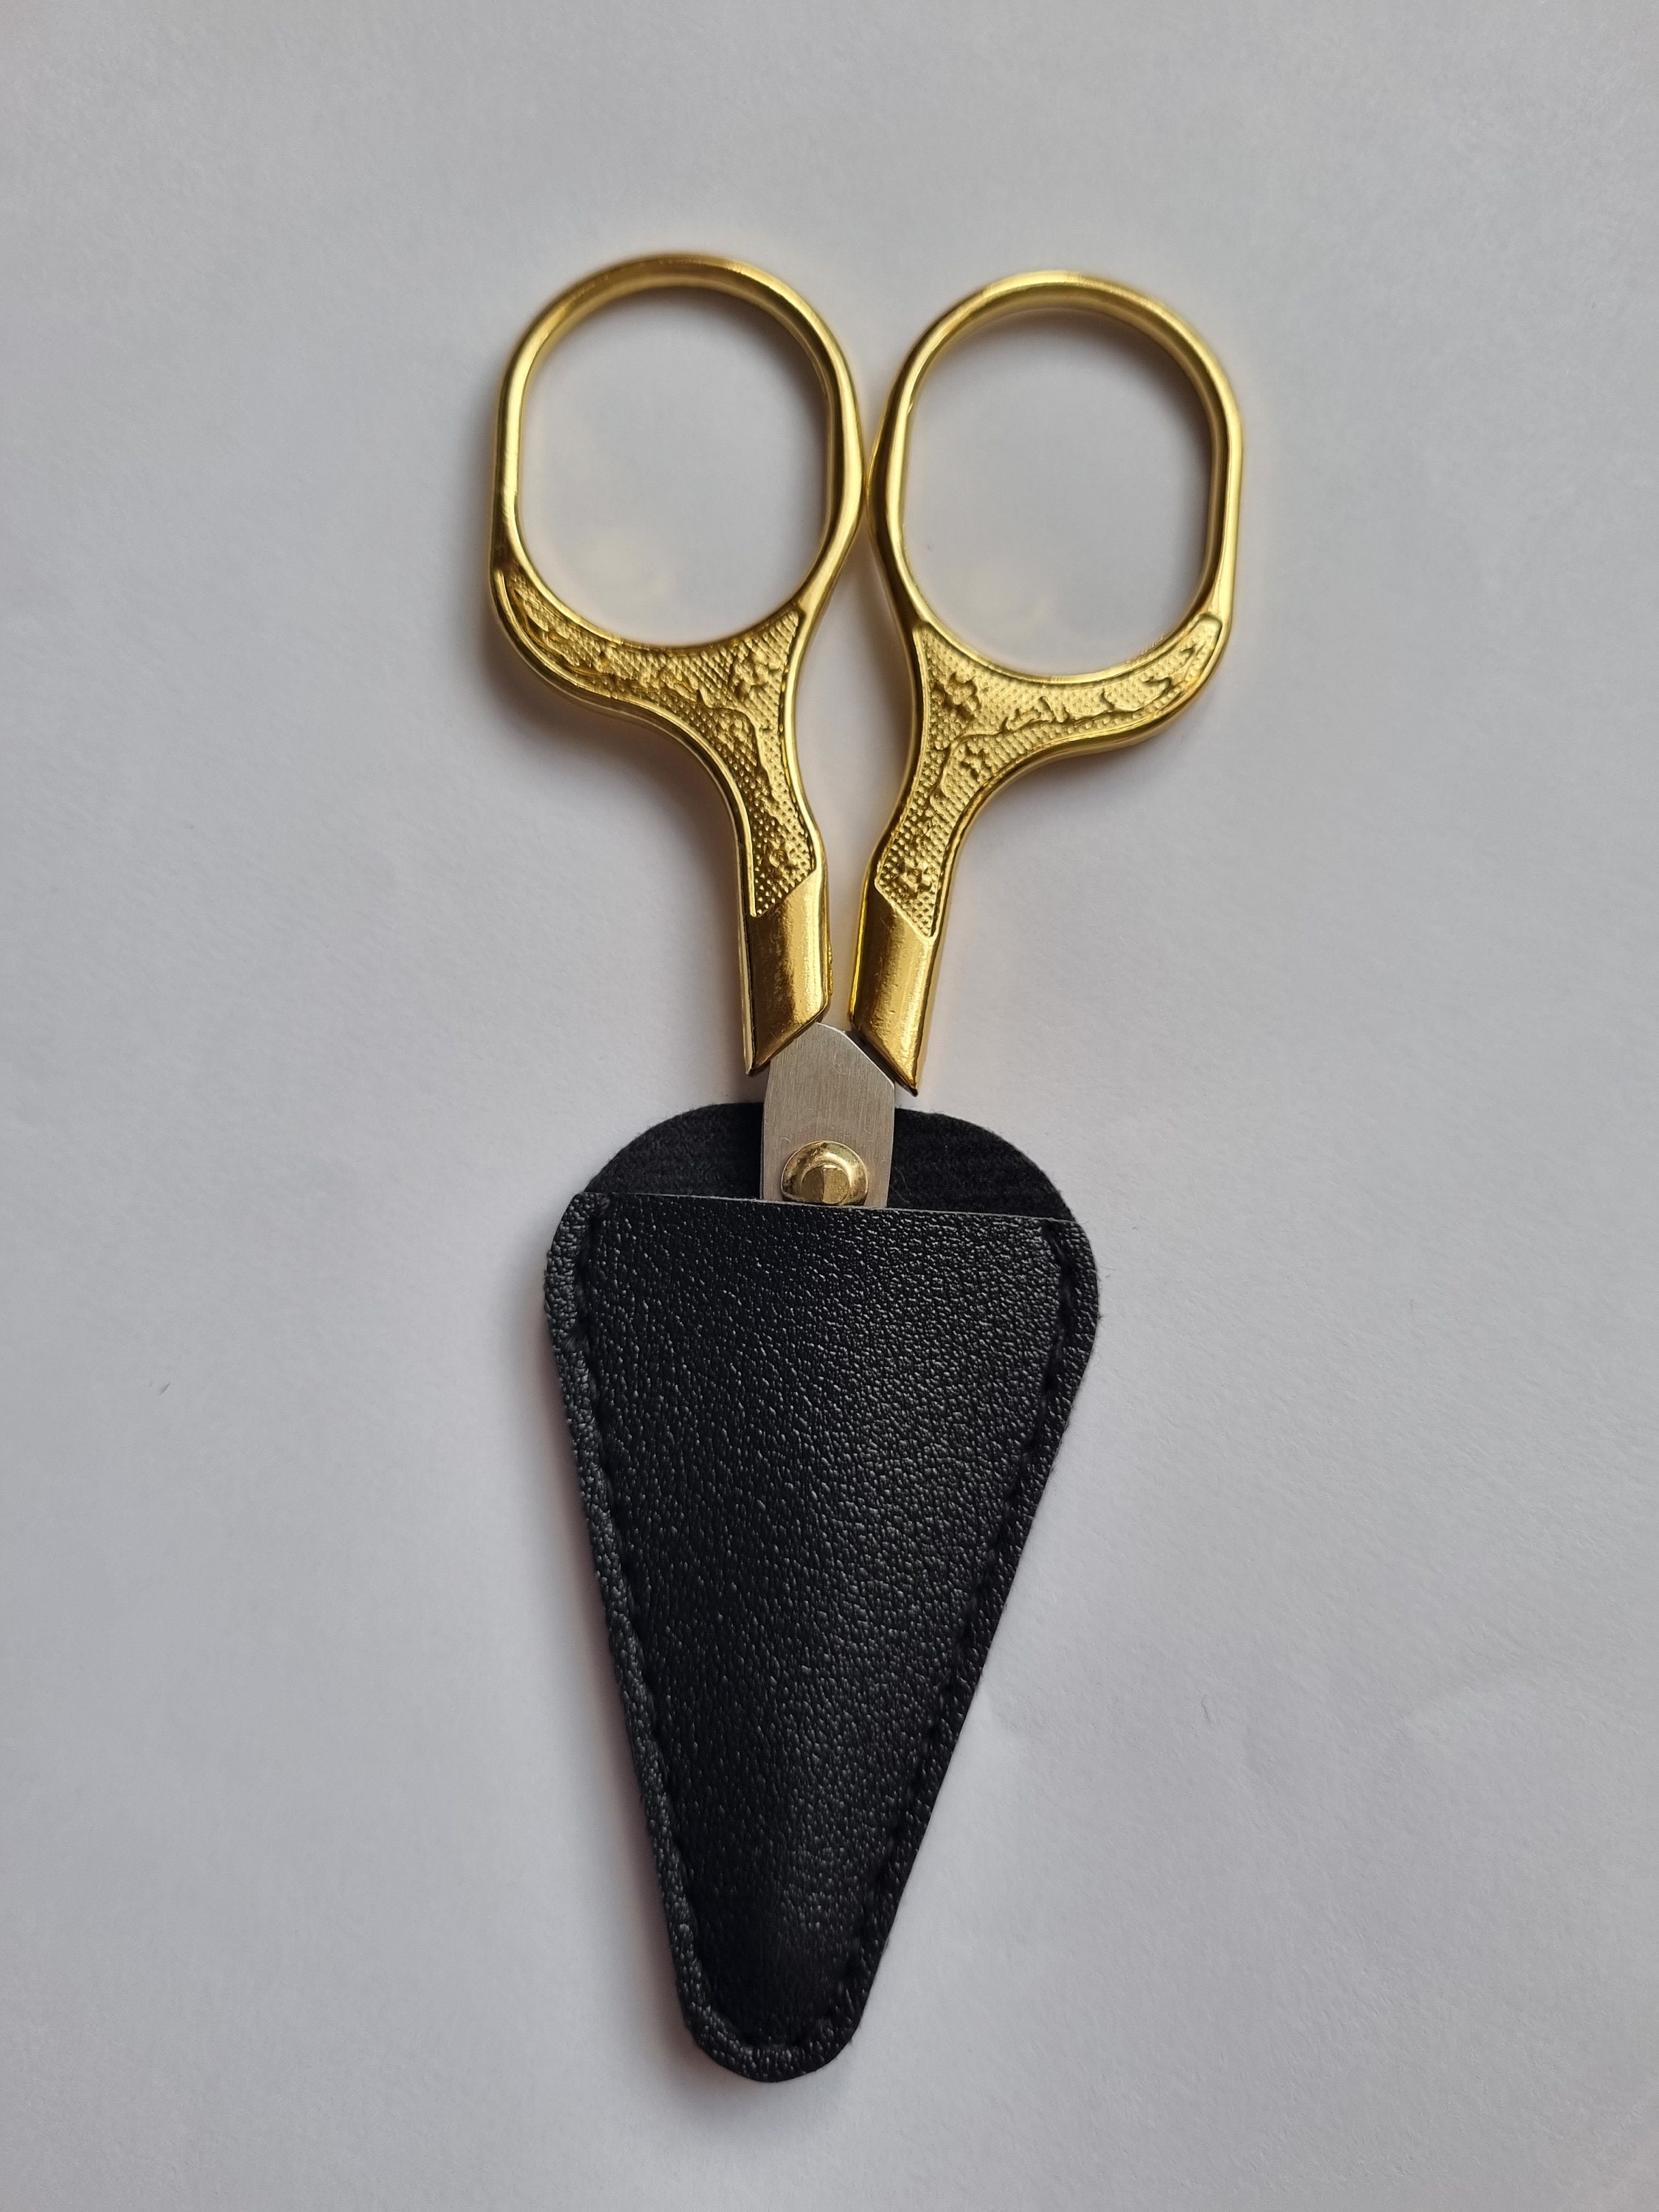 7 Medium Patchwork Scissors With Cover by Clover CL493 